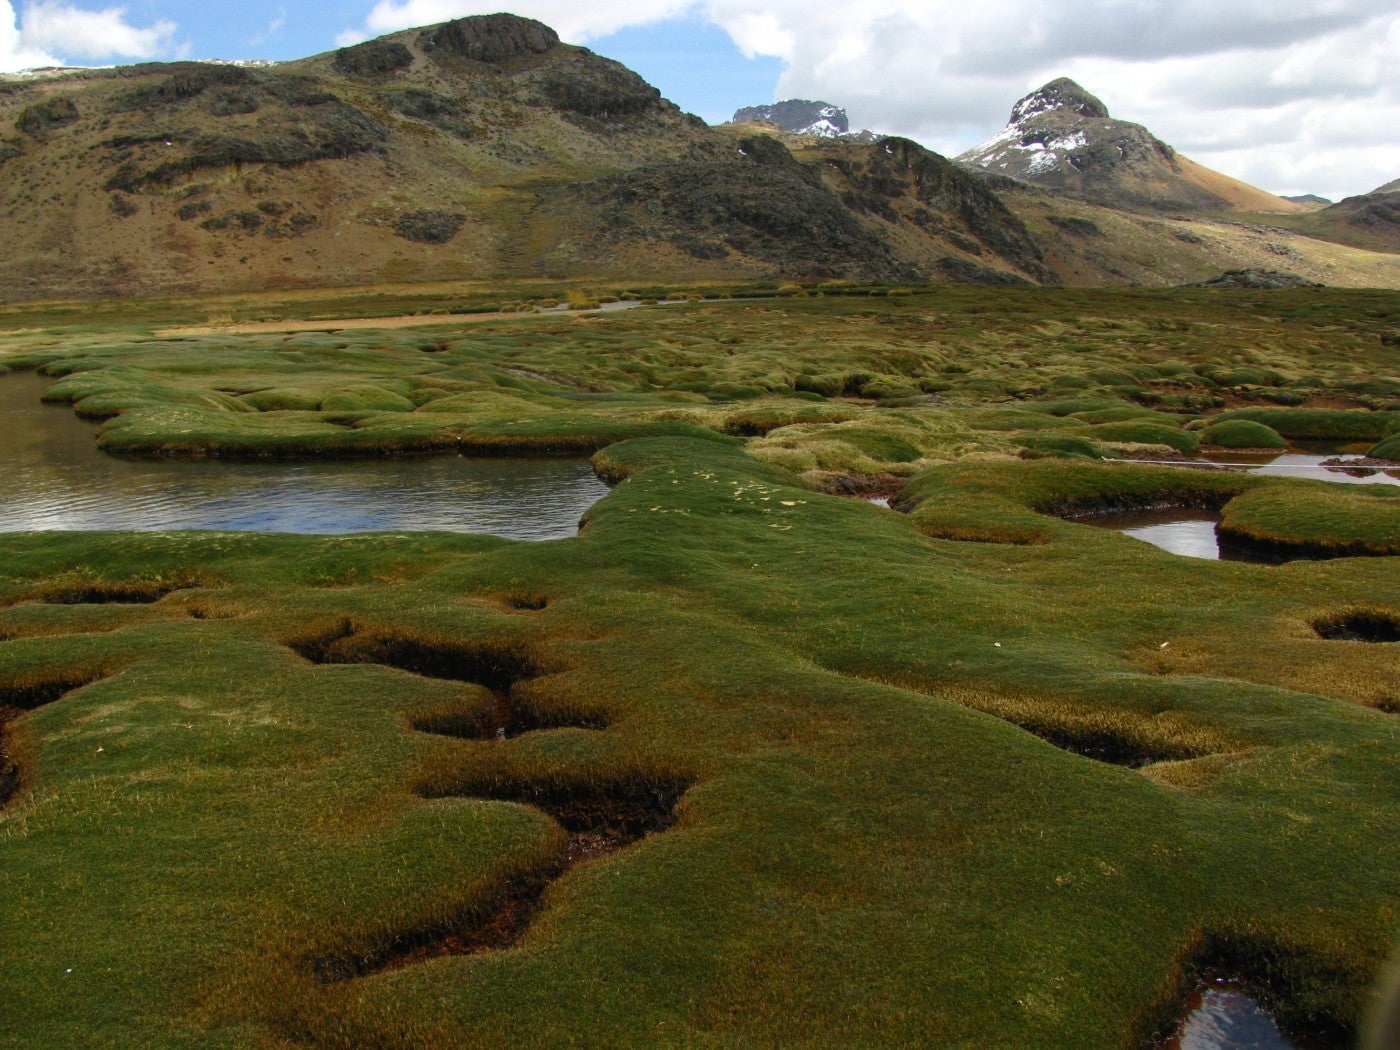 A bofedal wetland with flat vegetation interspersed with pools of water and mountains in the background